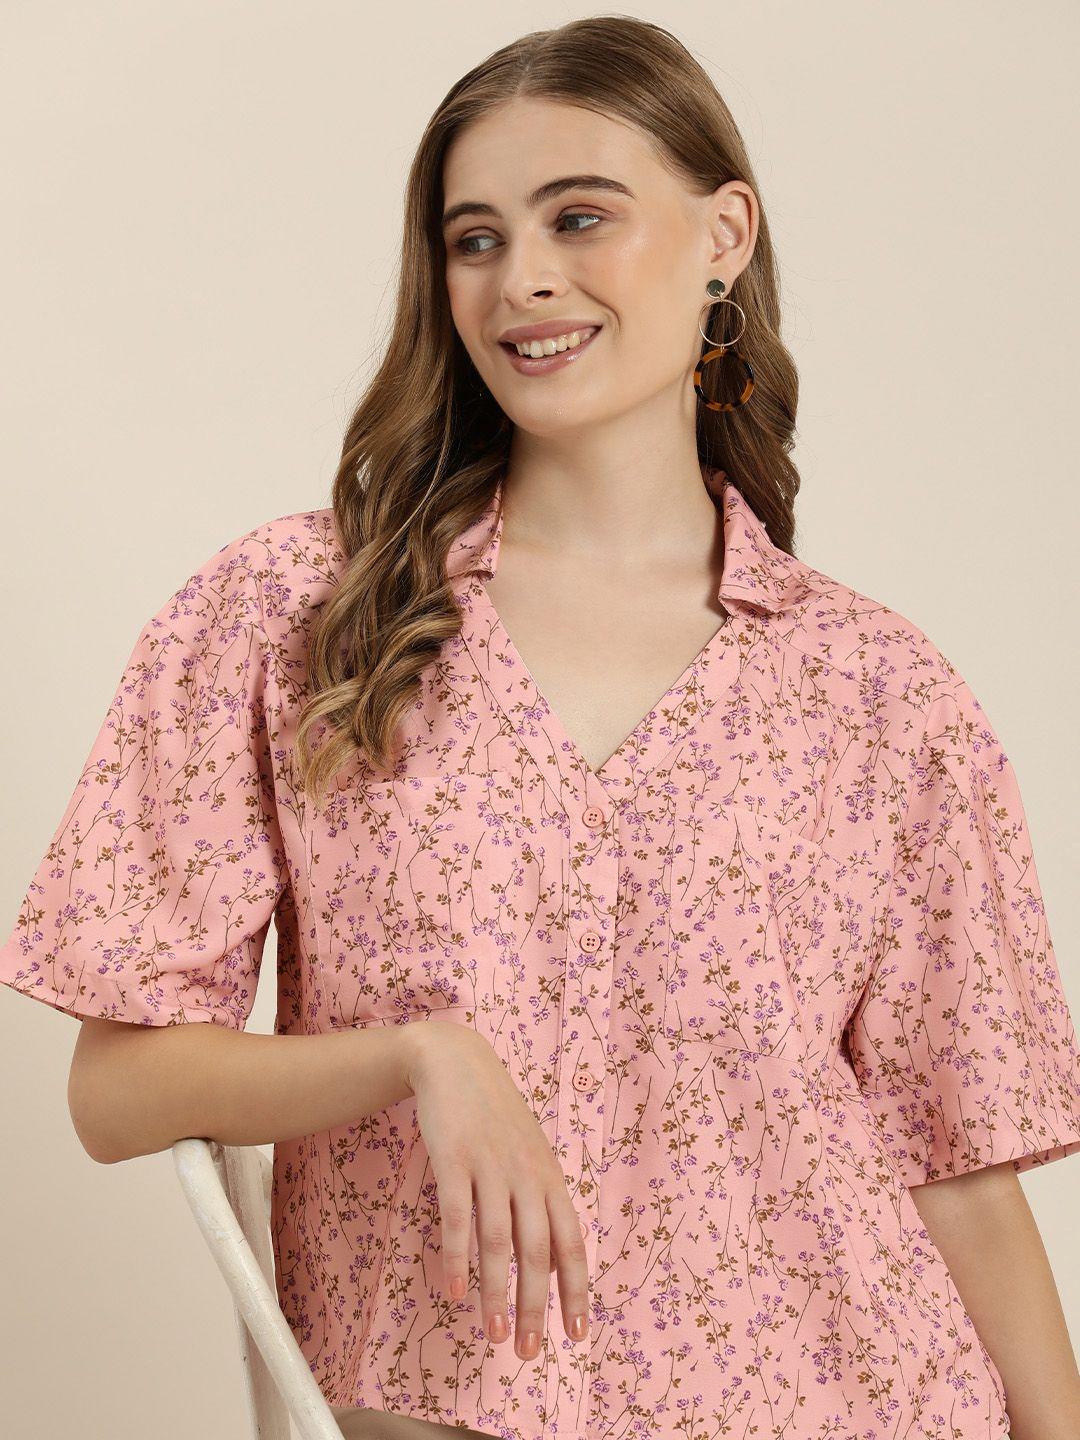 encore by invictus floral printed casual shirt